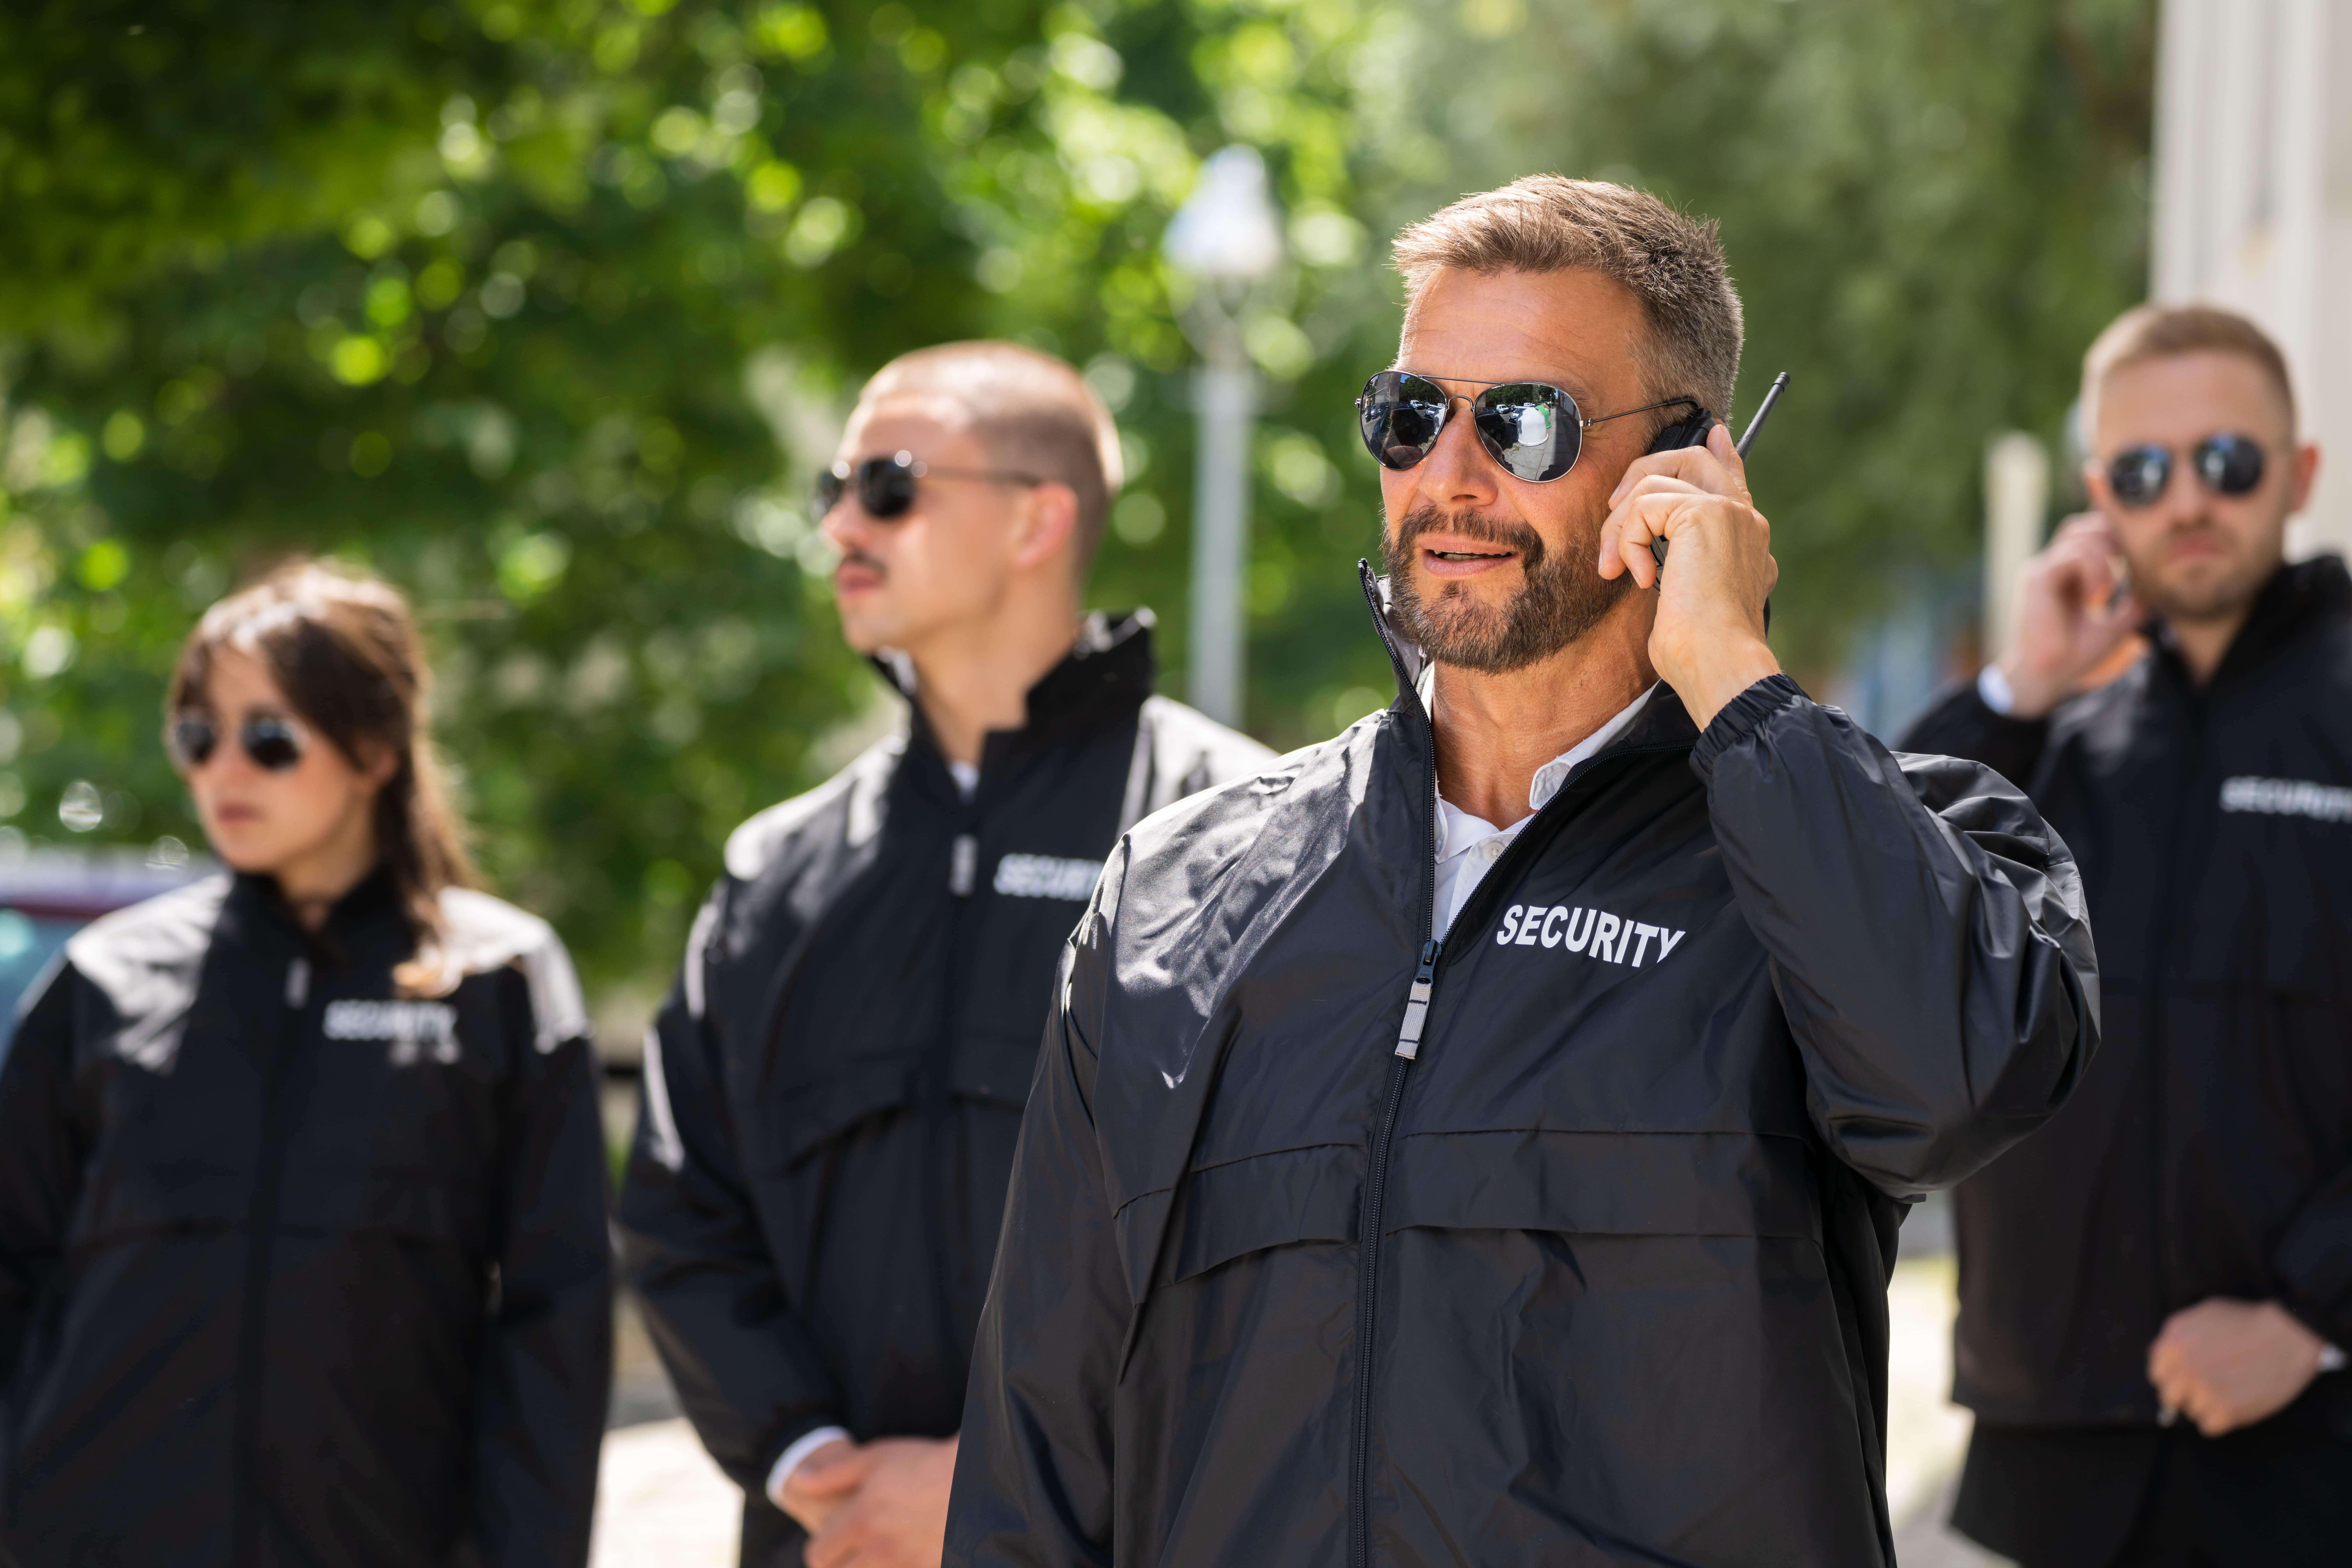 basic requirements and training for security guards